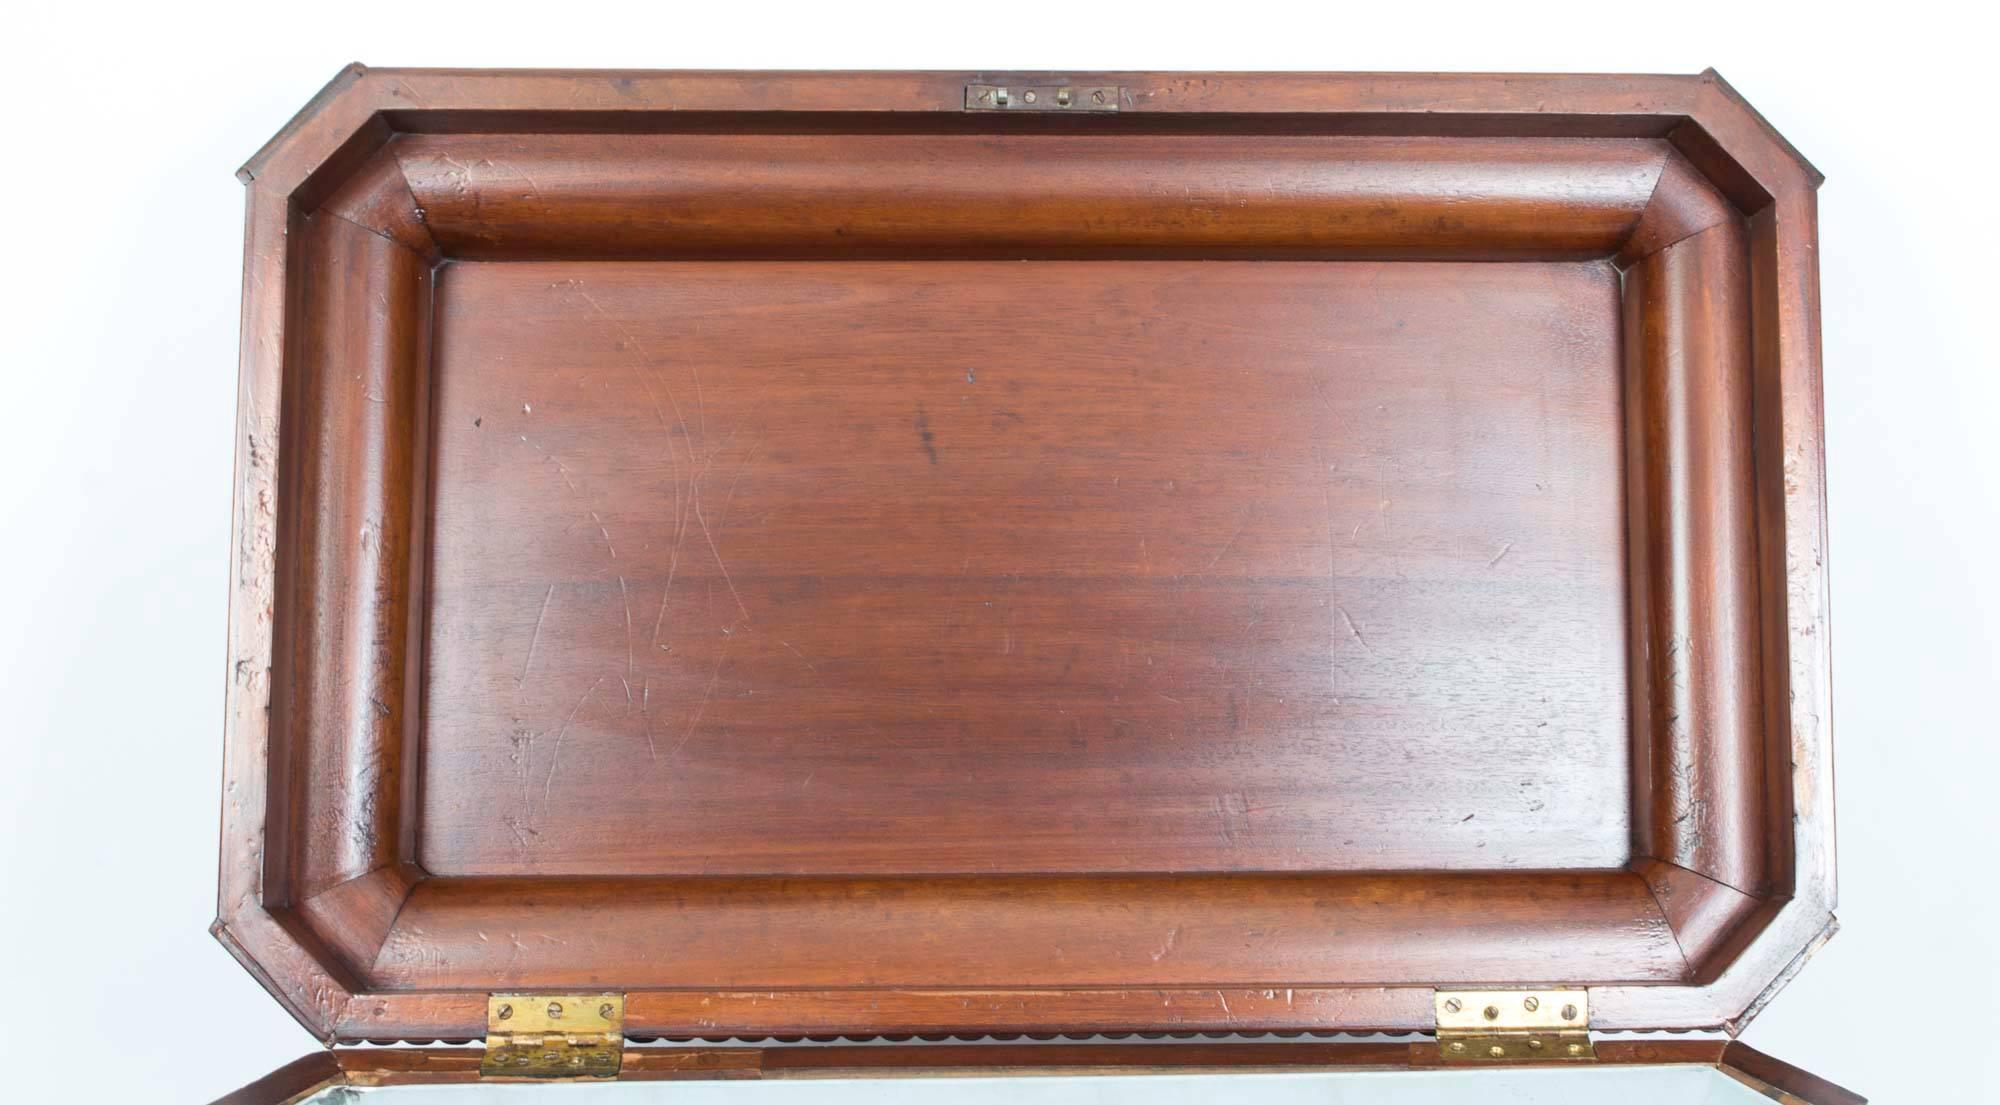 This is a gorgeous antique English Regency flame mahogany wine cellarette of sarcophagus form, circa 1820.

The cellarette has a hinged lid with a beautiful beaded edge and the lid opens to reveal a spacious interior with a removable liner,